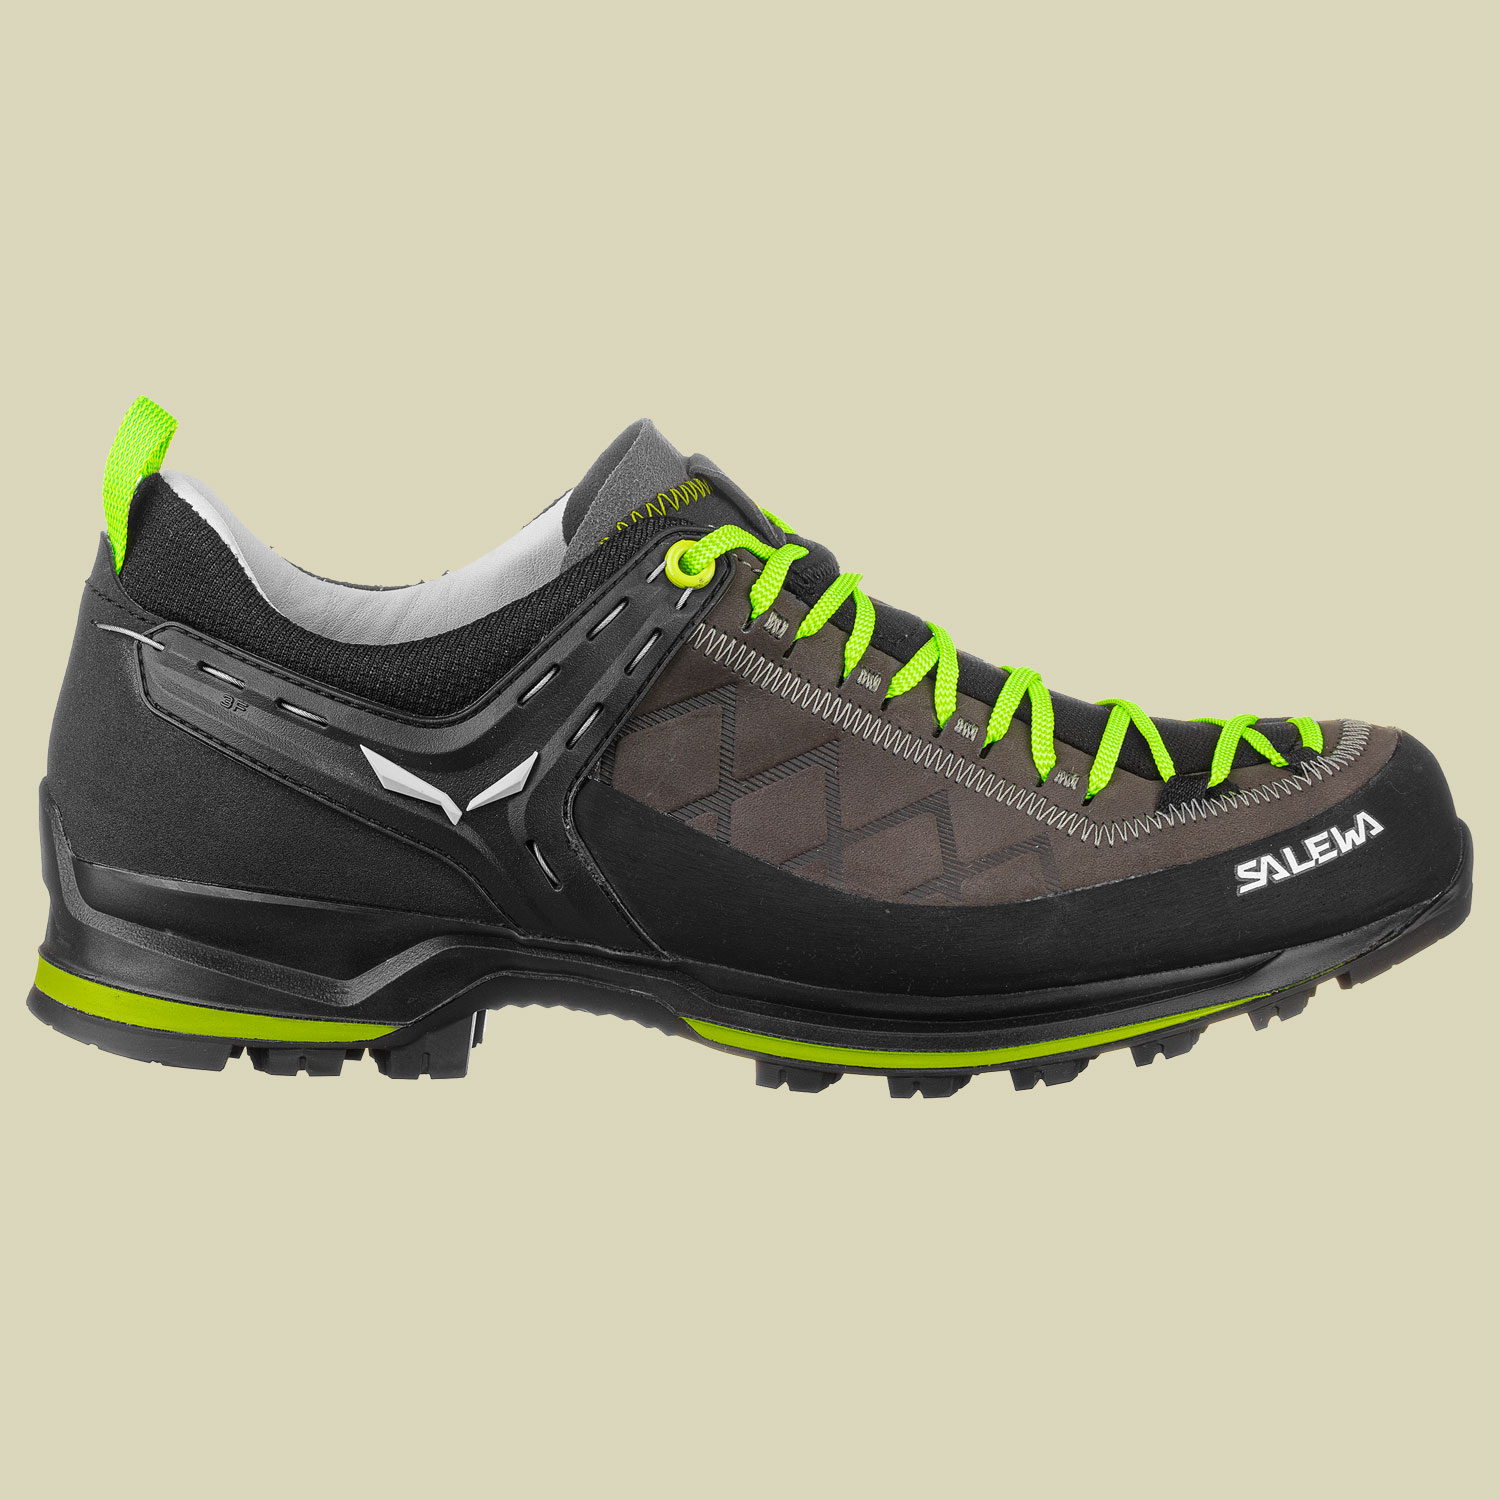 MS MTN Trainer 2 L Men Größe UK 12 Farbe smoked/fluo green